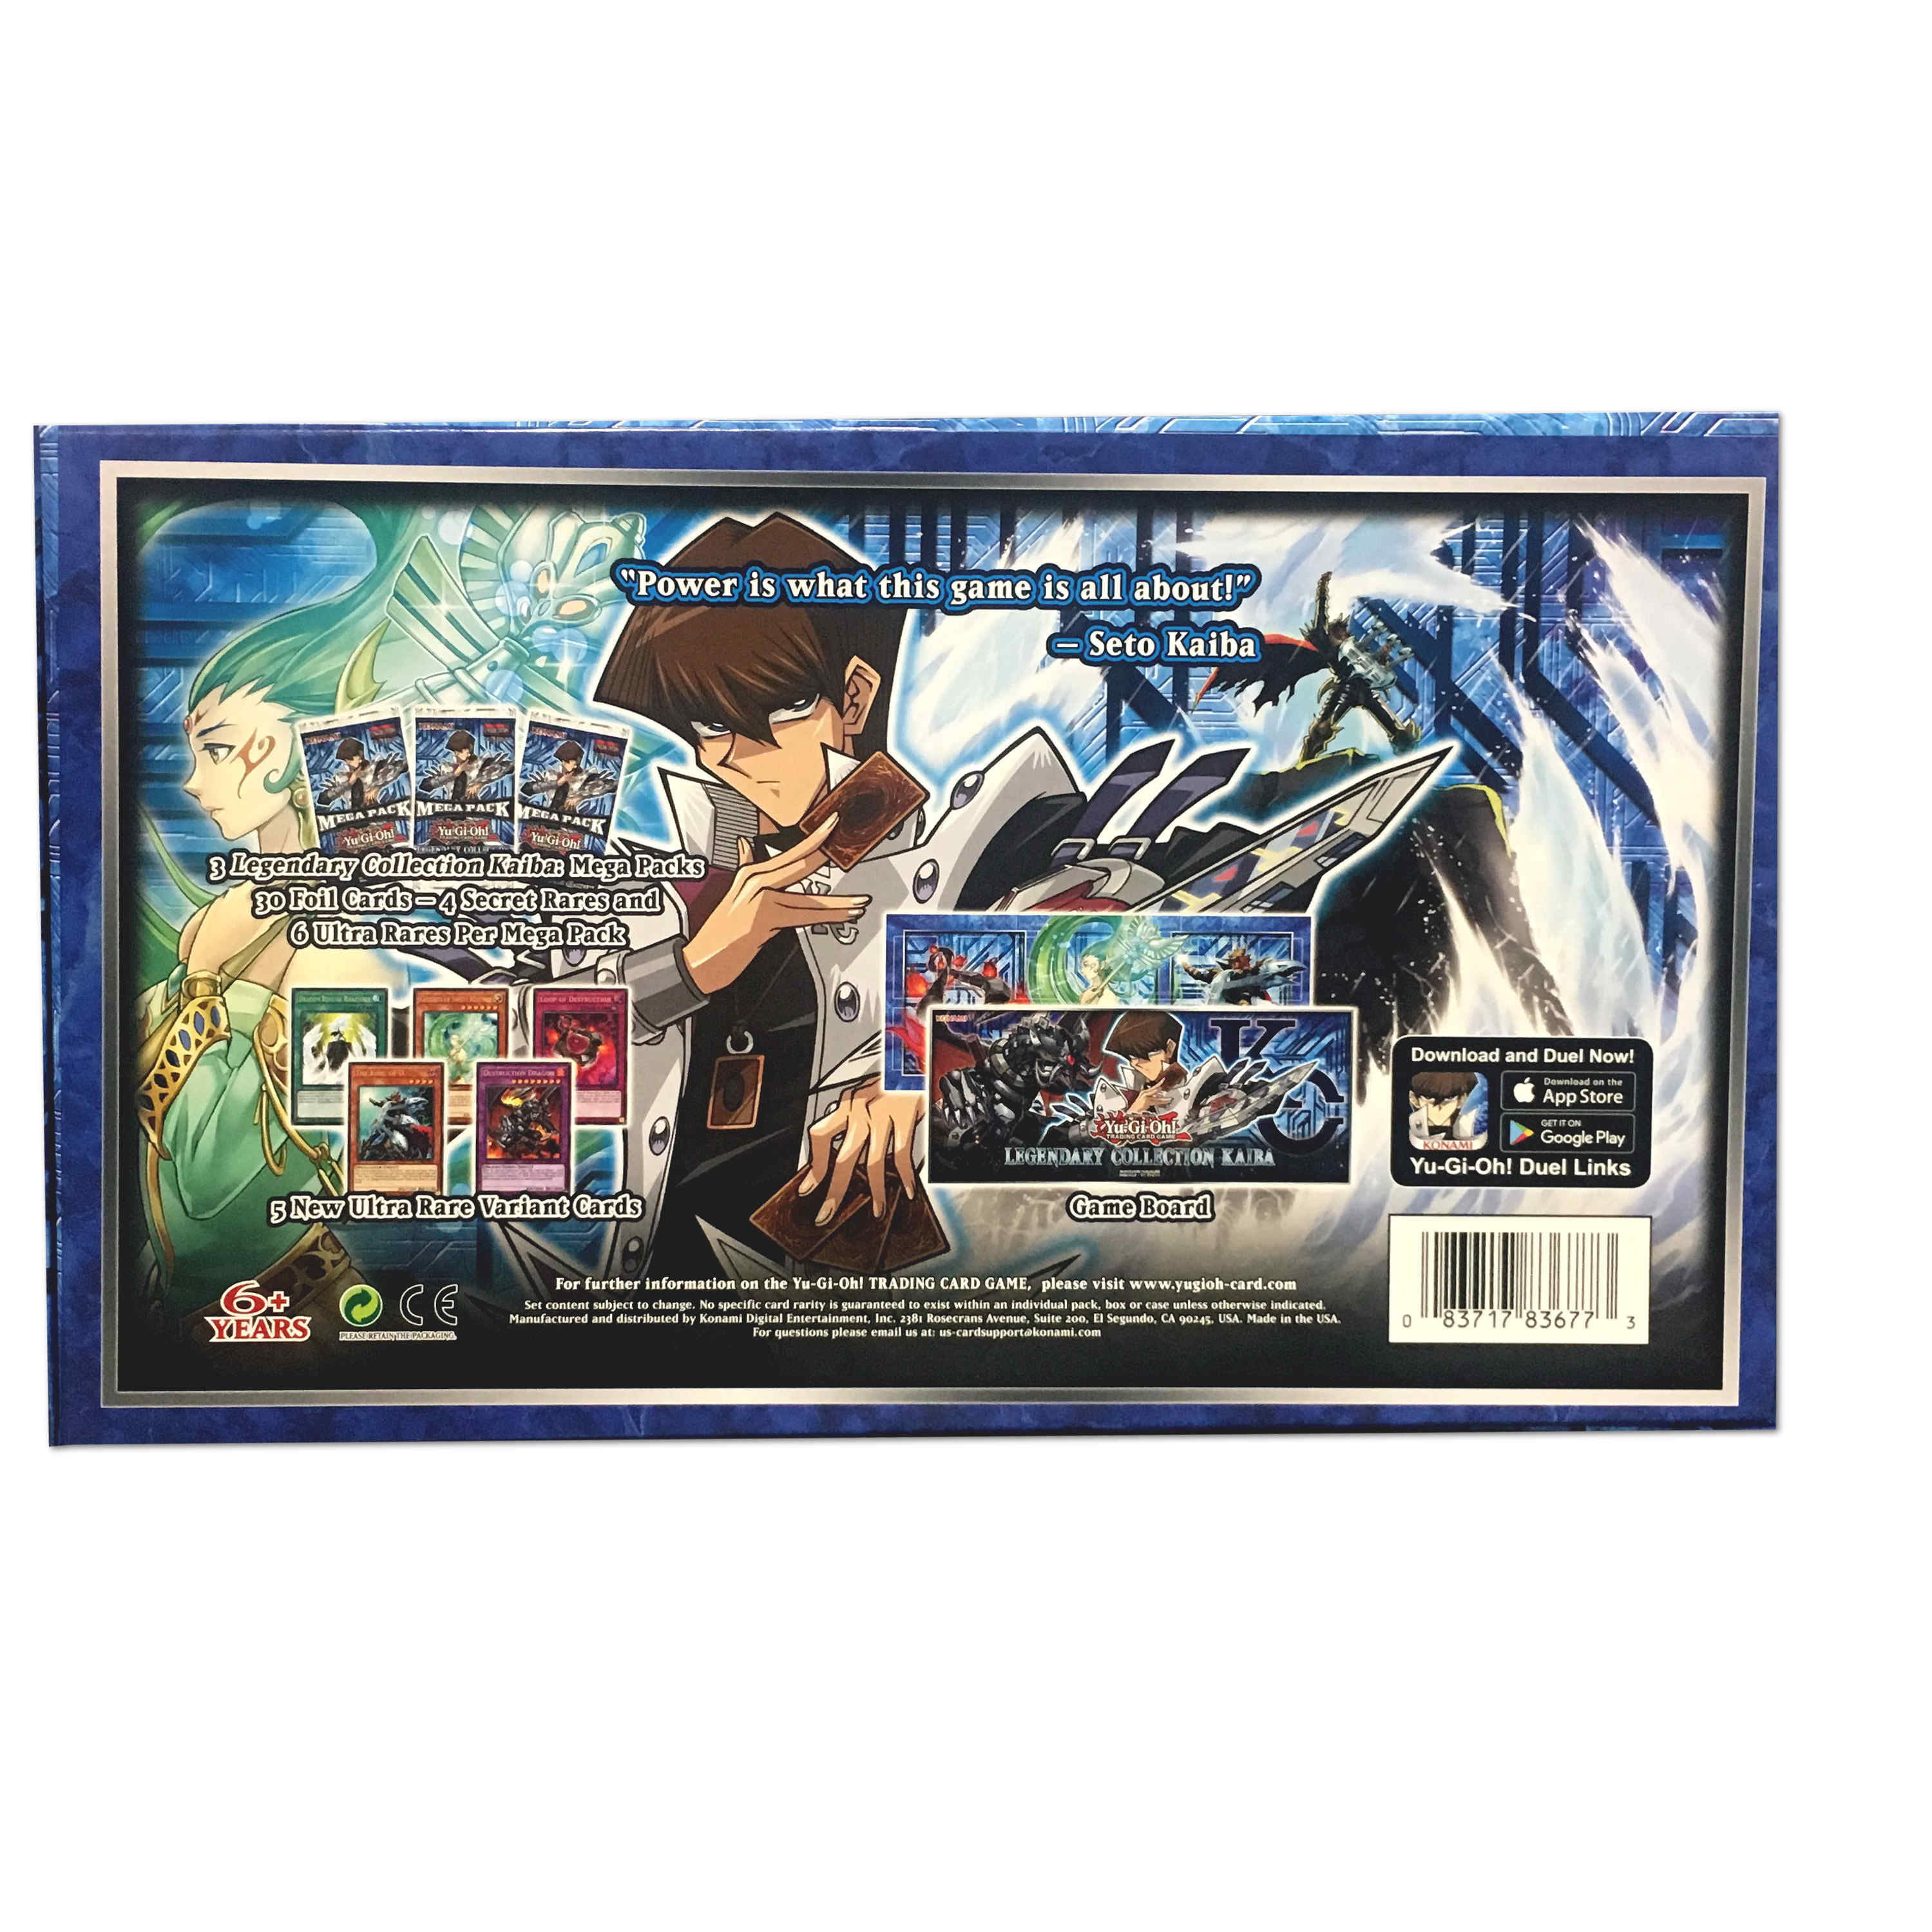 UNOPENED FACTORY SEALED NEW YUGIOH! *** LEGENDARY KAIBA COLLECTION *** 